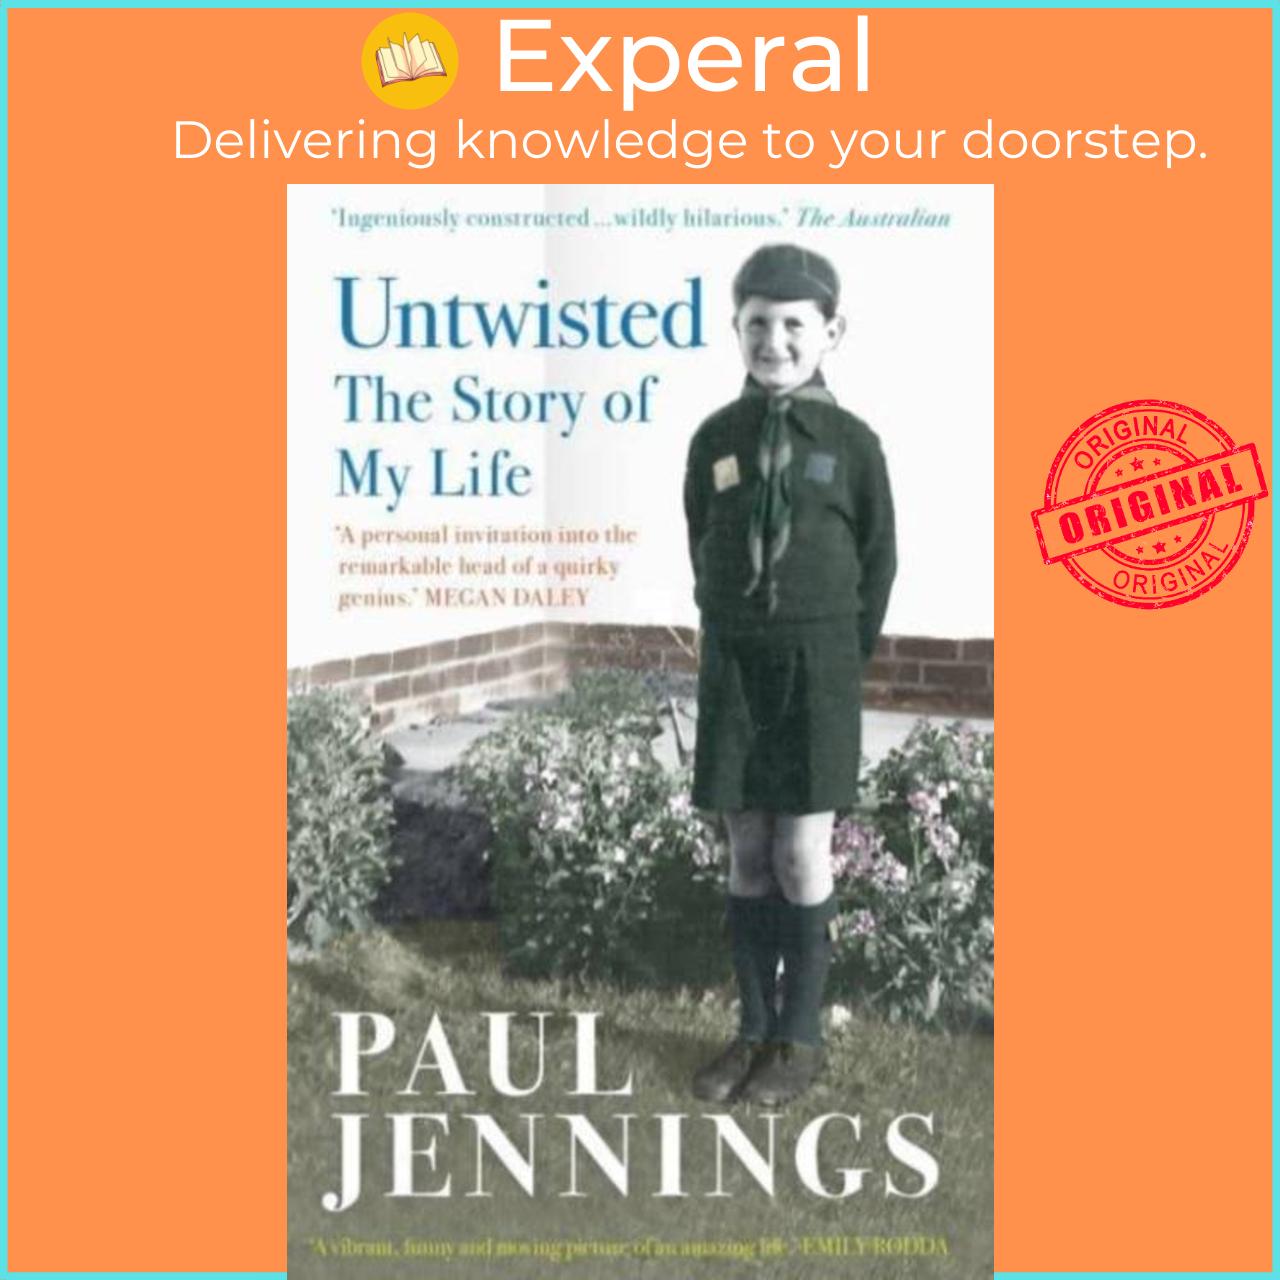 Sách - Untwisted: The Story of My Life by Paul Jennings (UK edition, paperback)